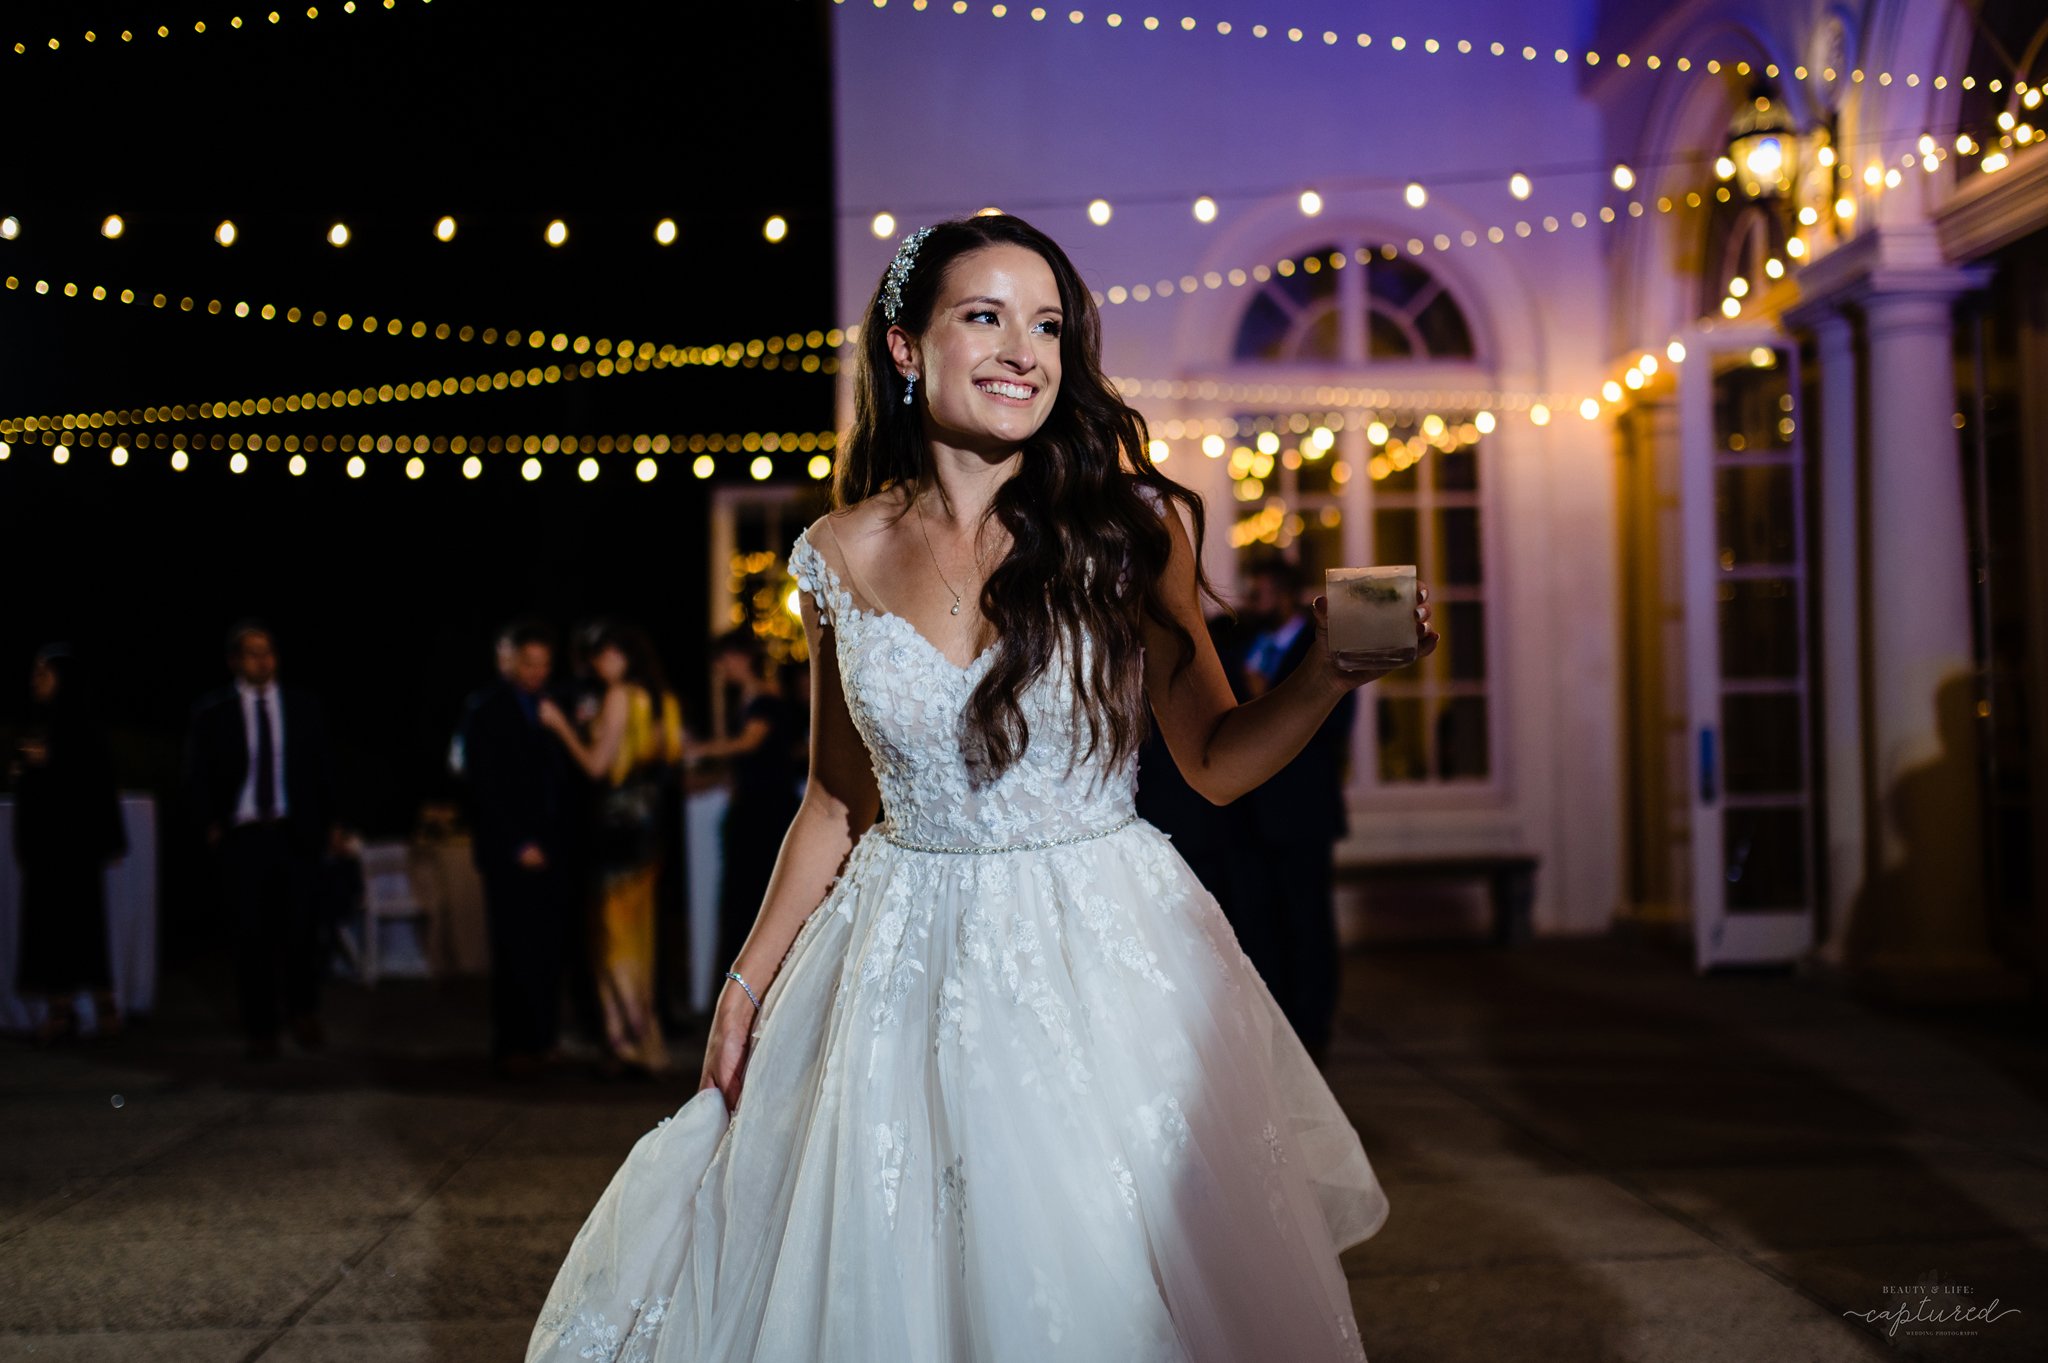 Beauty_and_Life_Captured_Danielle_and_Javier_Wedding_test-155.jpg